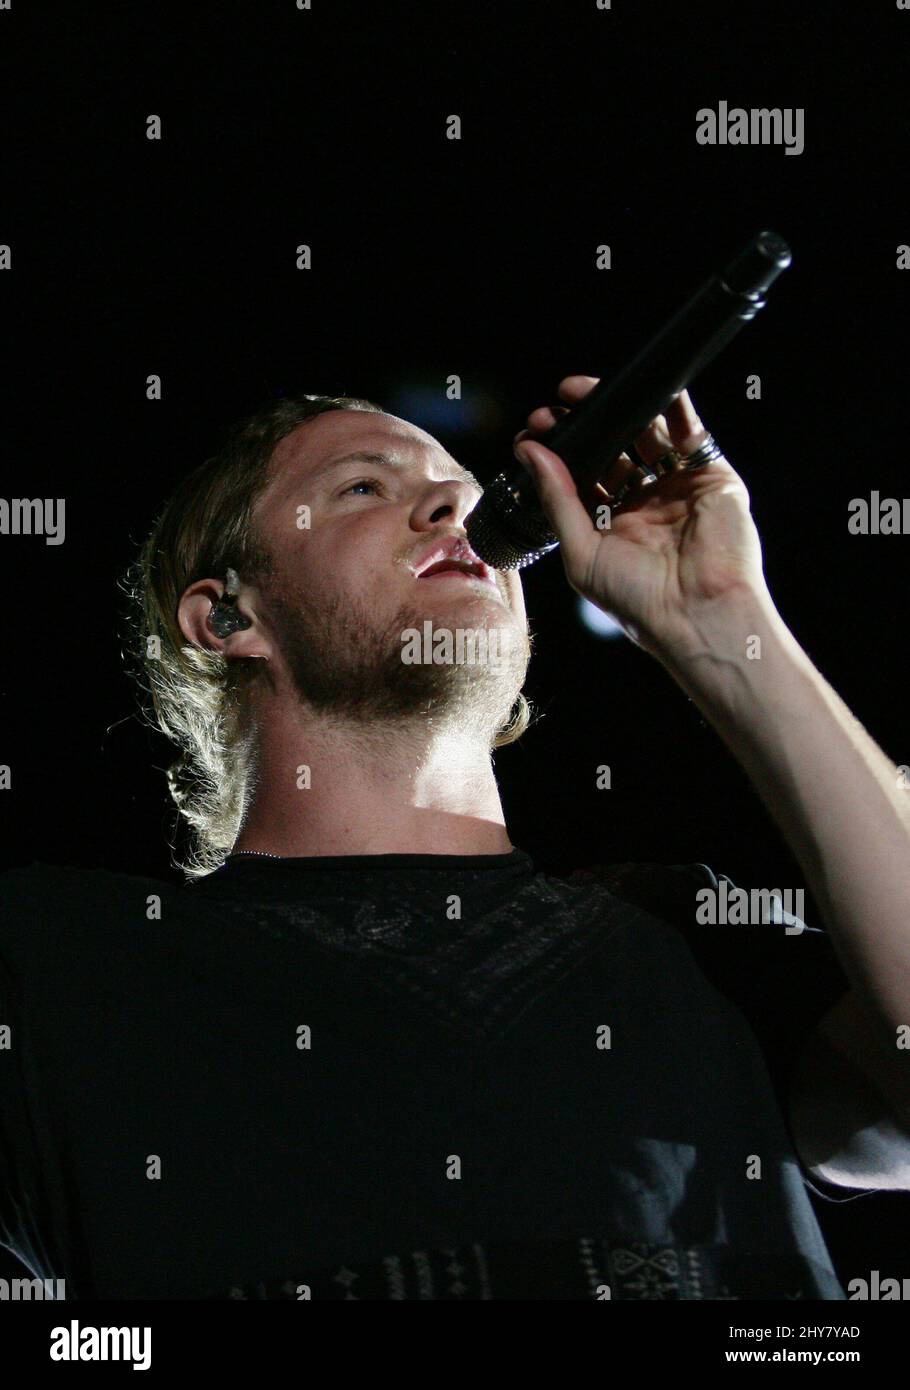 Dan Reynolds of Imagine Dragons during day 2 of the Life Is Beautiful Festival in Las Vegas, Nevada. Stock Photo